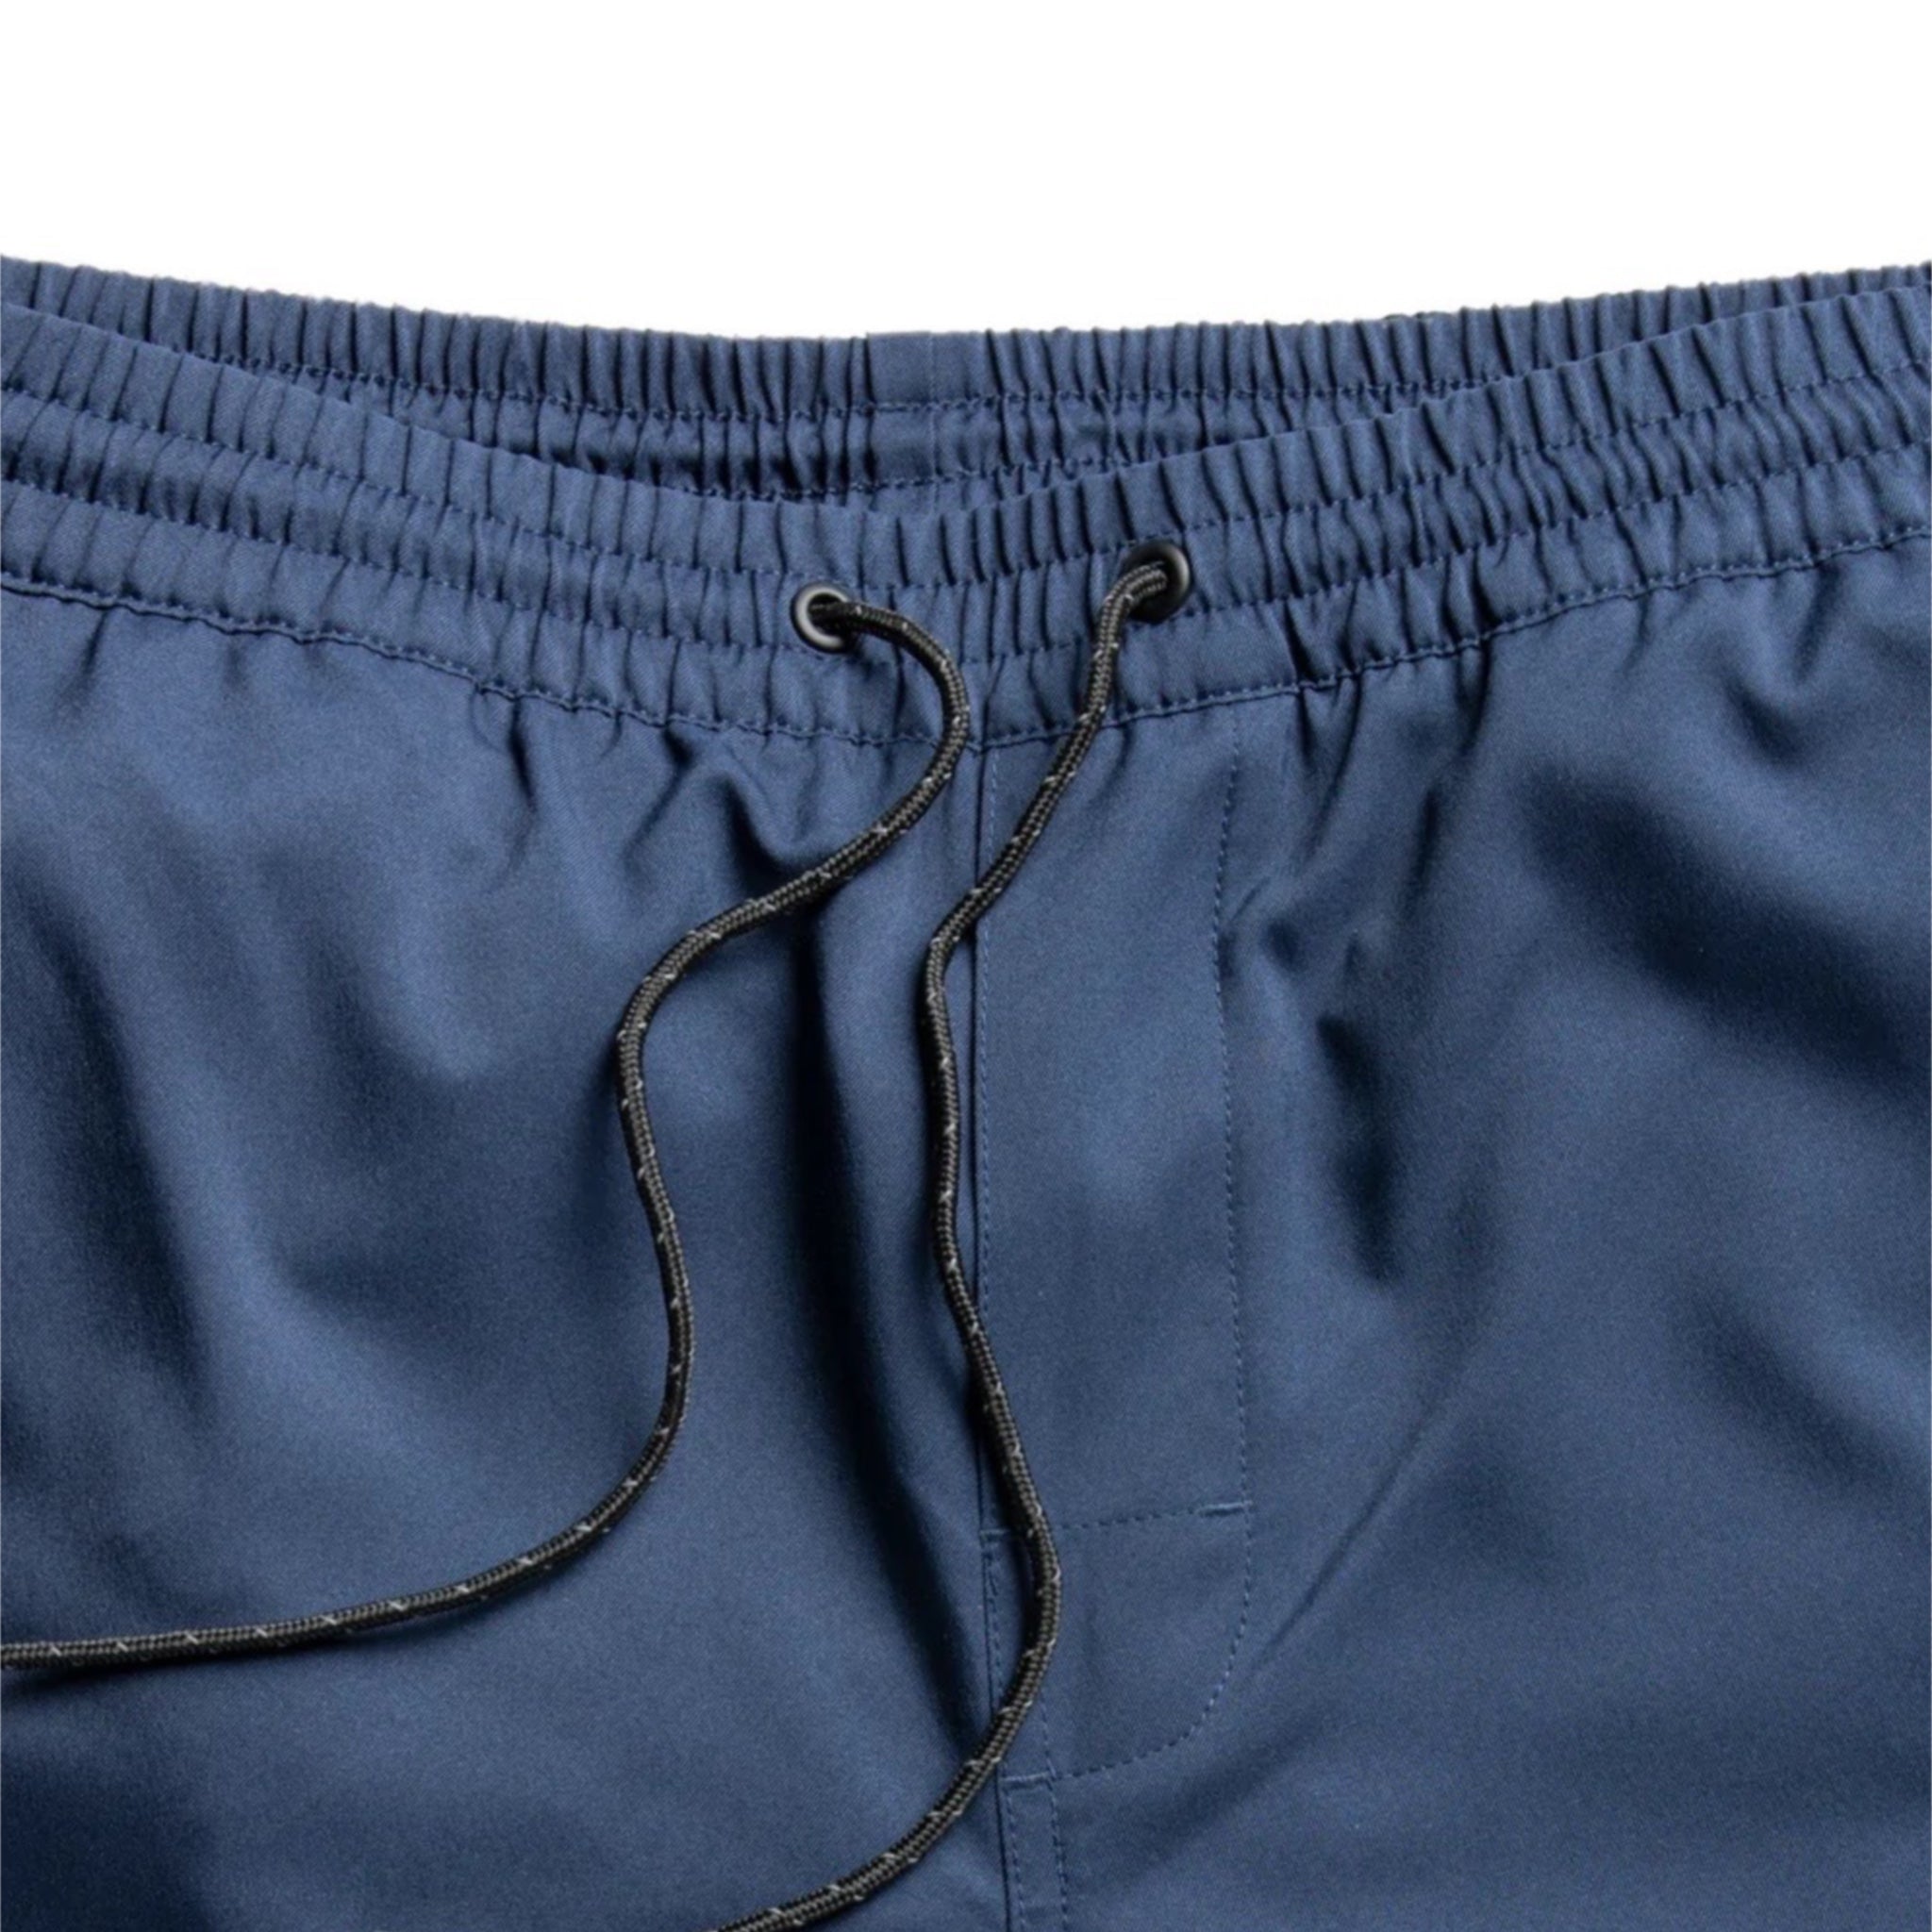 Outerknown Nomadic Volley Short - Marine